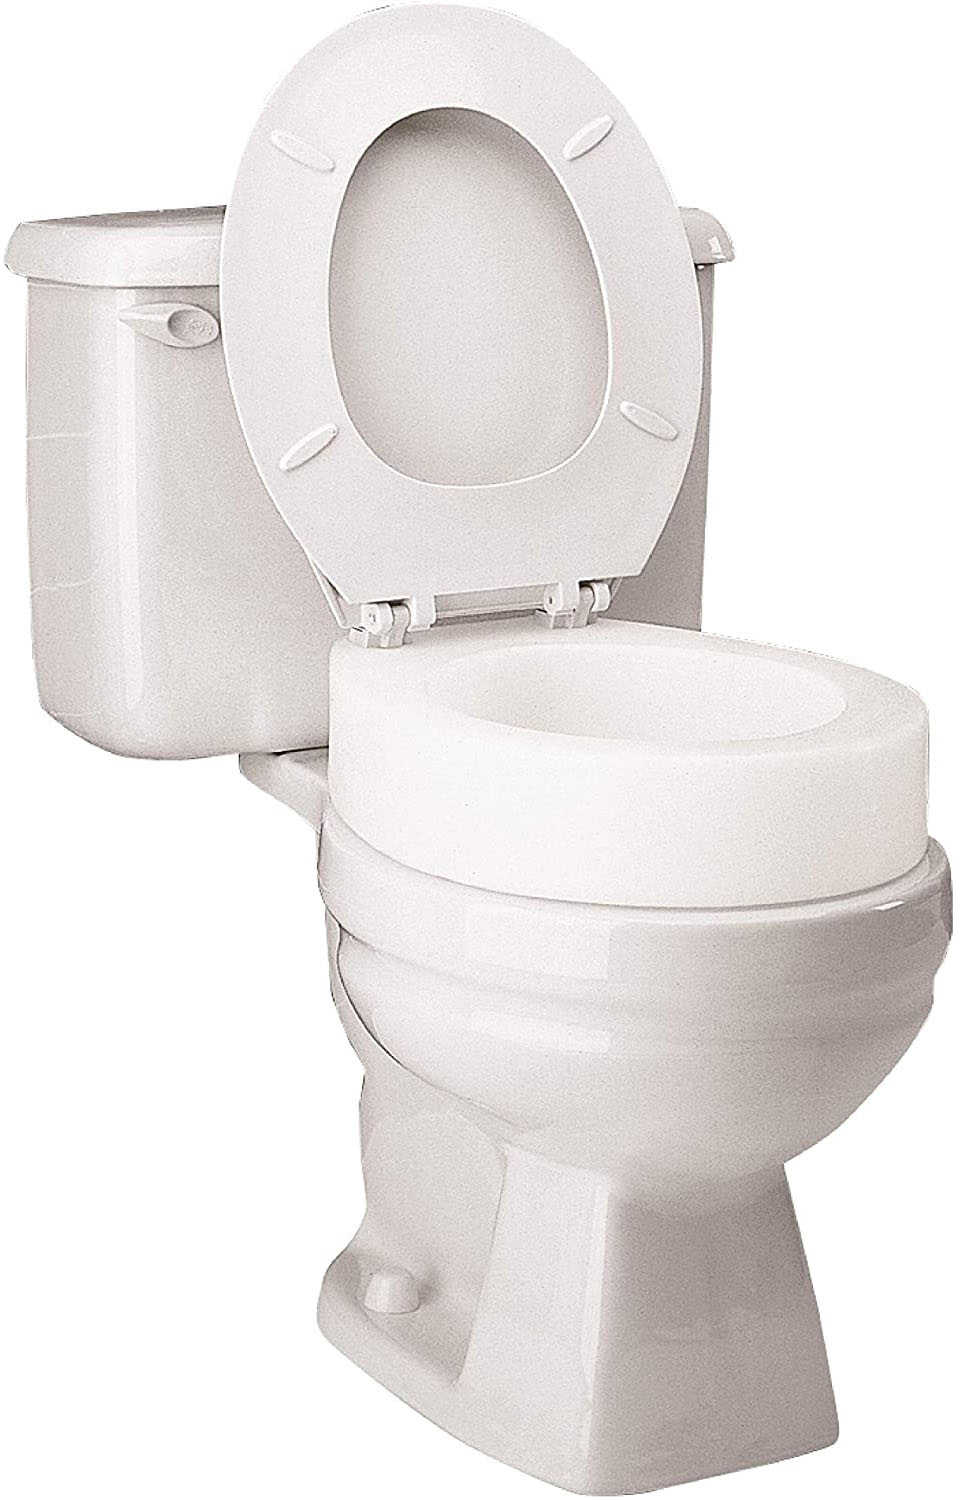 U.S Low Cost Airlines Excited to start Providing Flushable Potty Economy  Seats